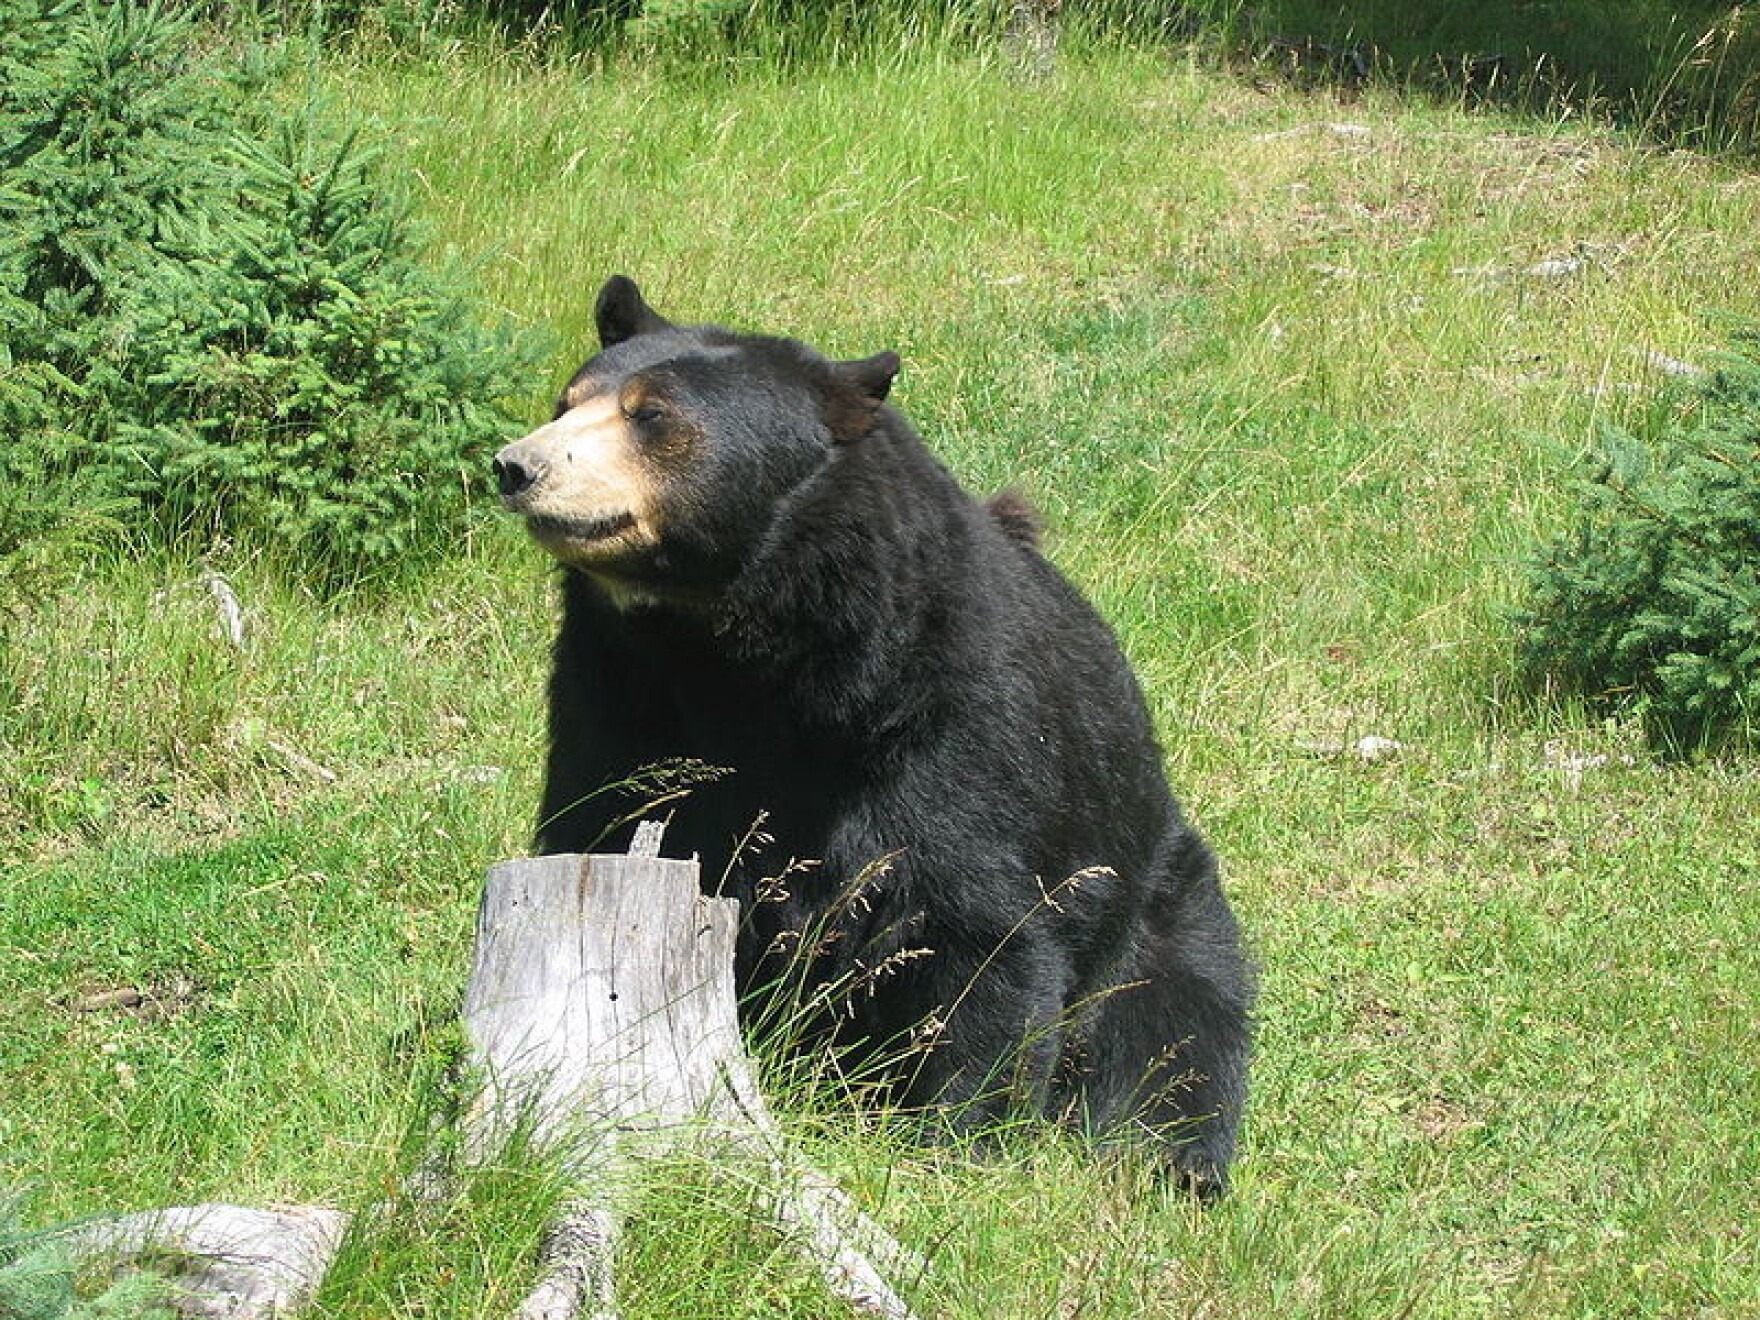 The Washington Fish and Wildlife Commission suspended the 2022 spring bear hunt season after a split vote to authorize the controversial hunt.